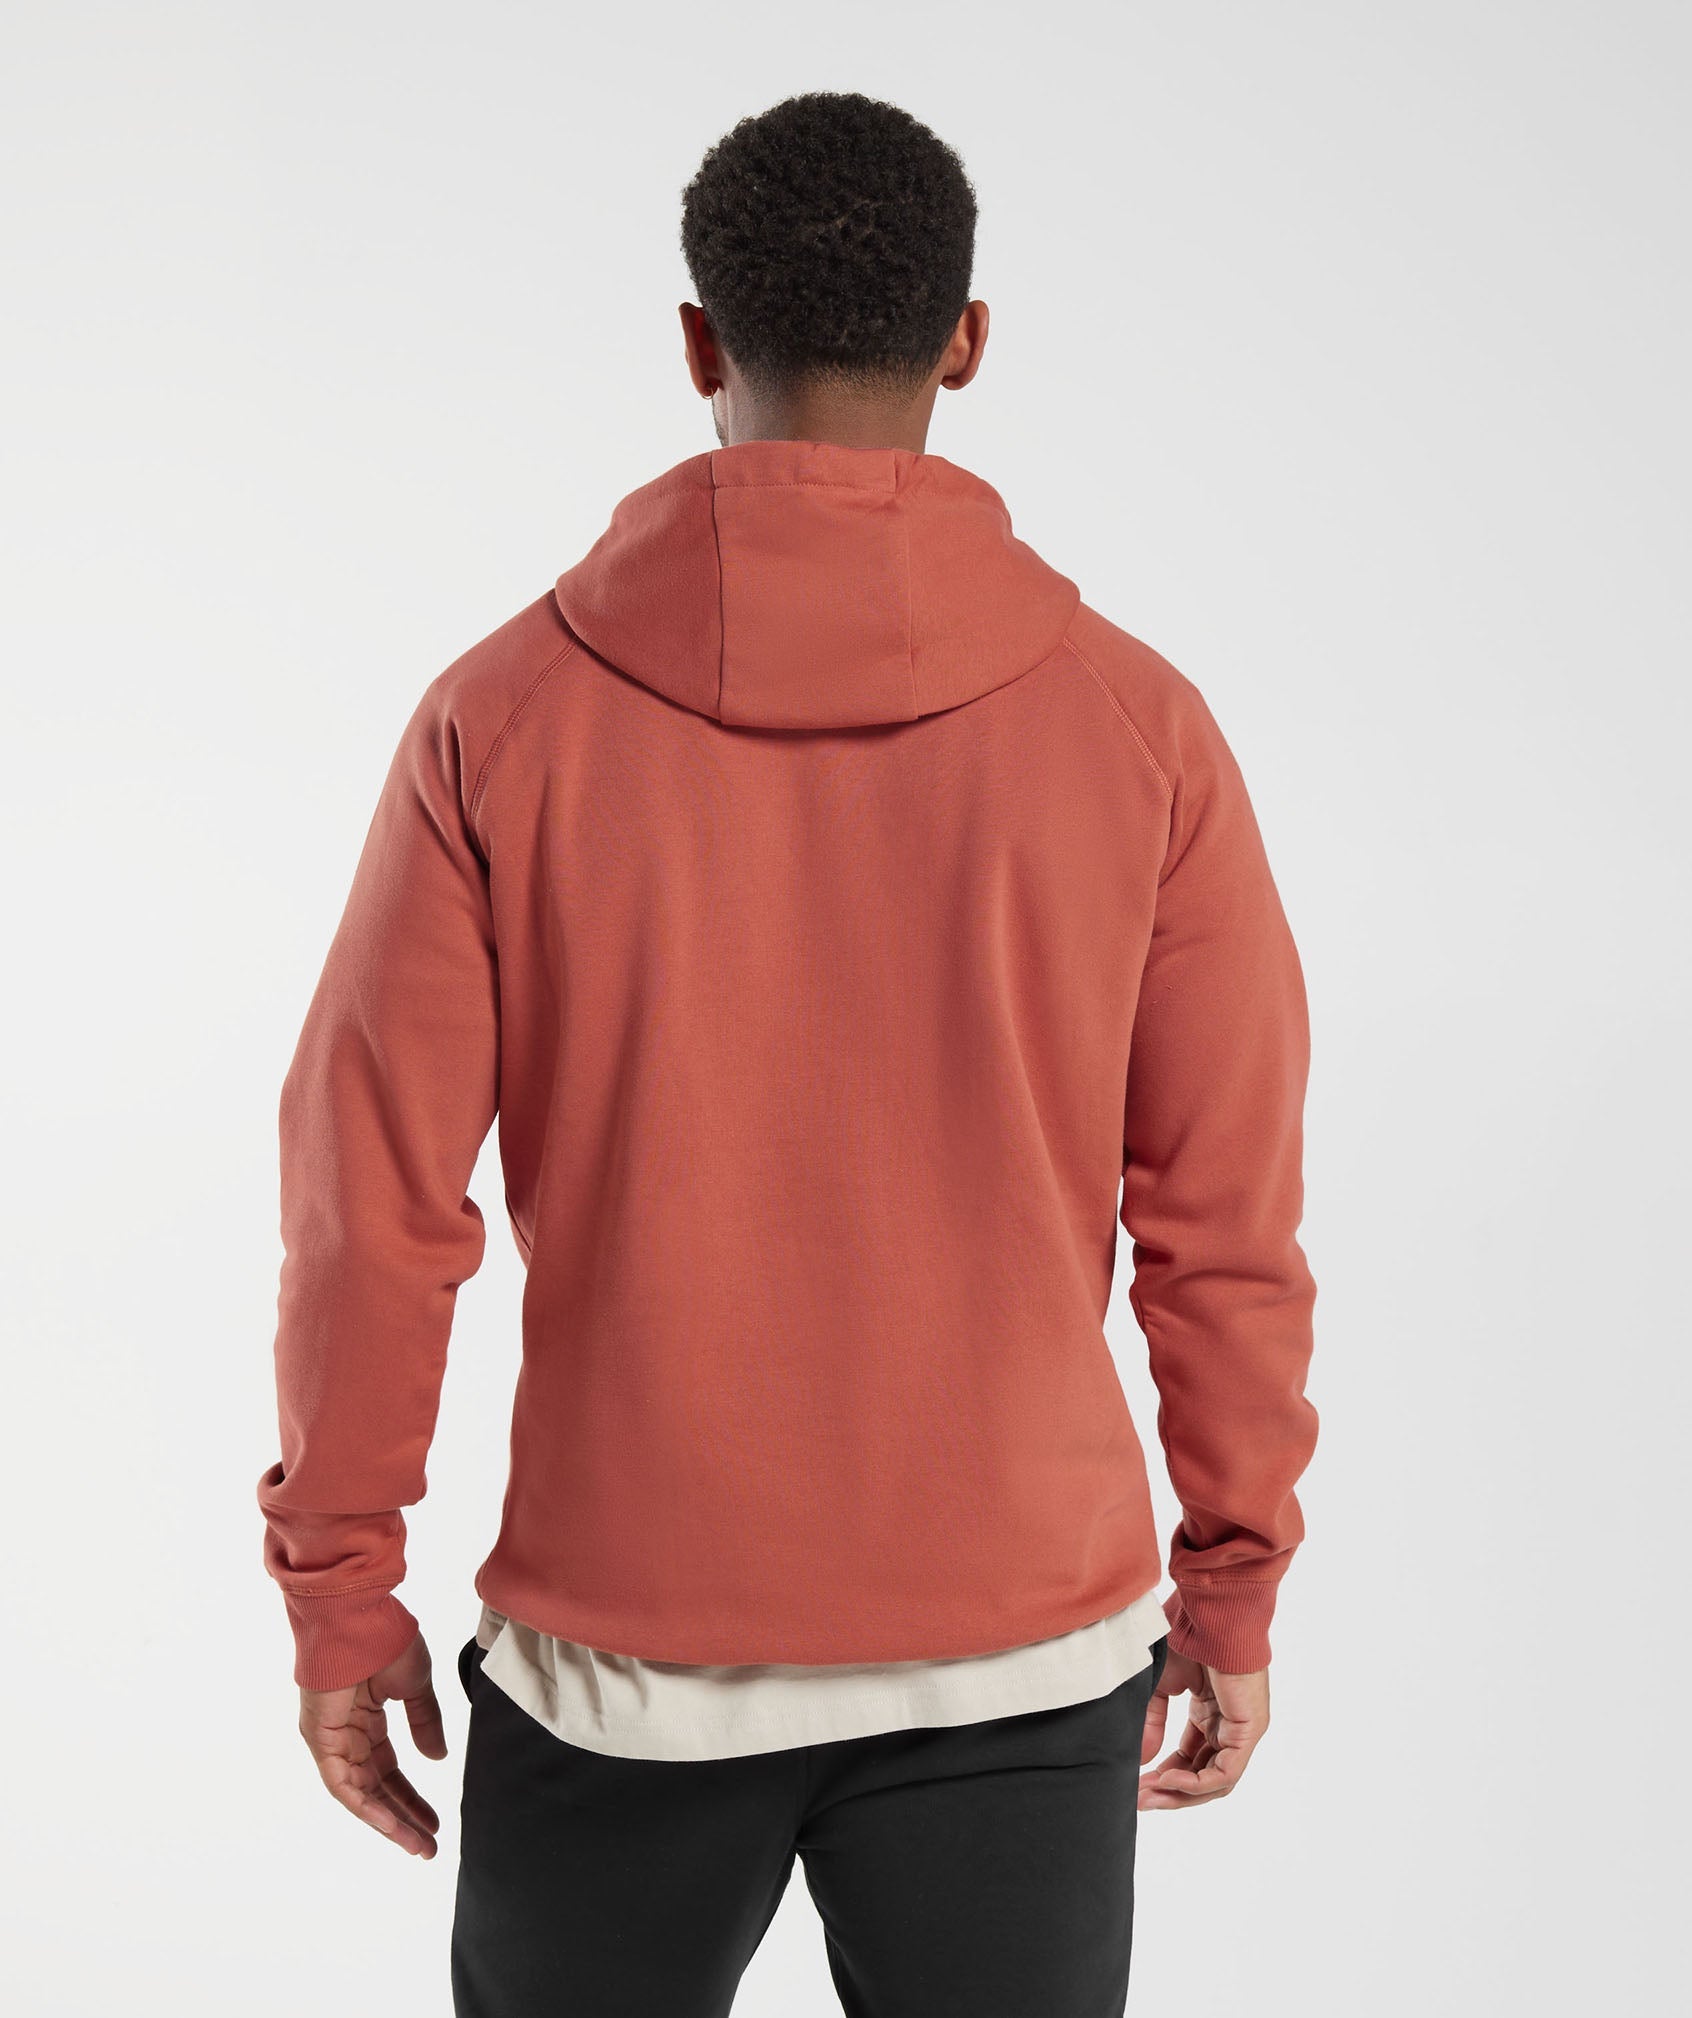 Crest Hoodie in Persimmon Red - view 2